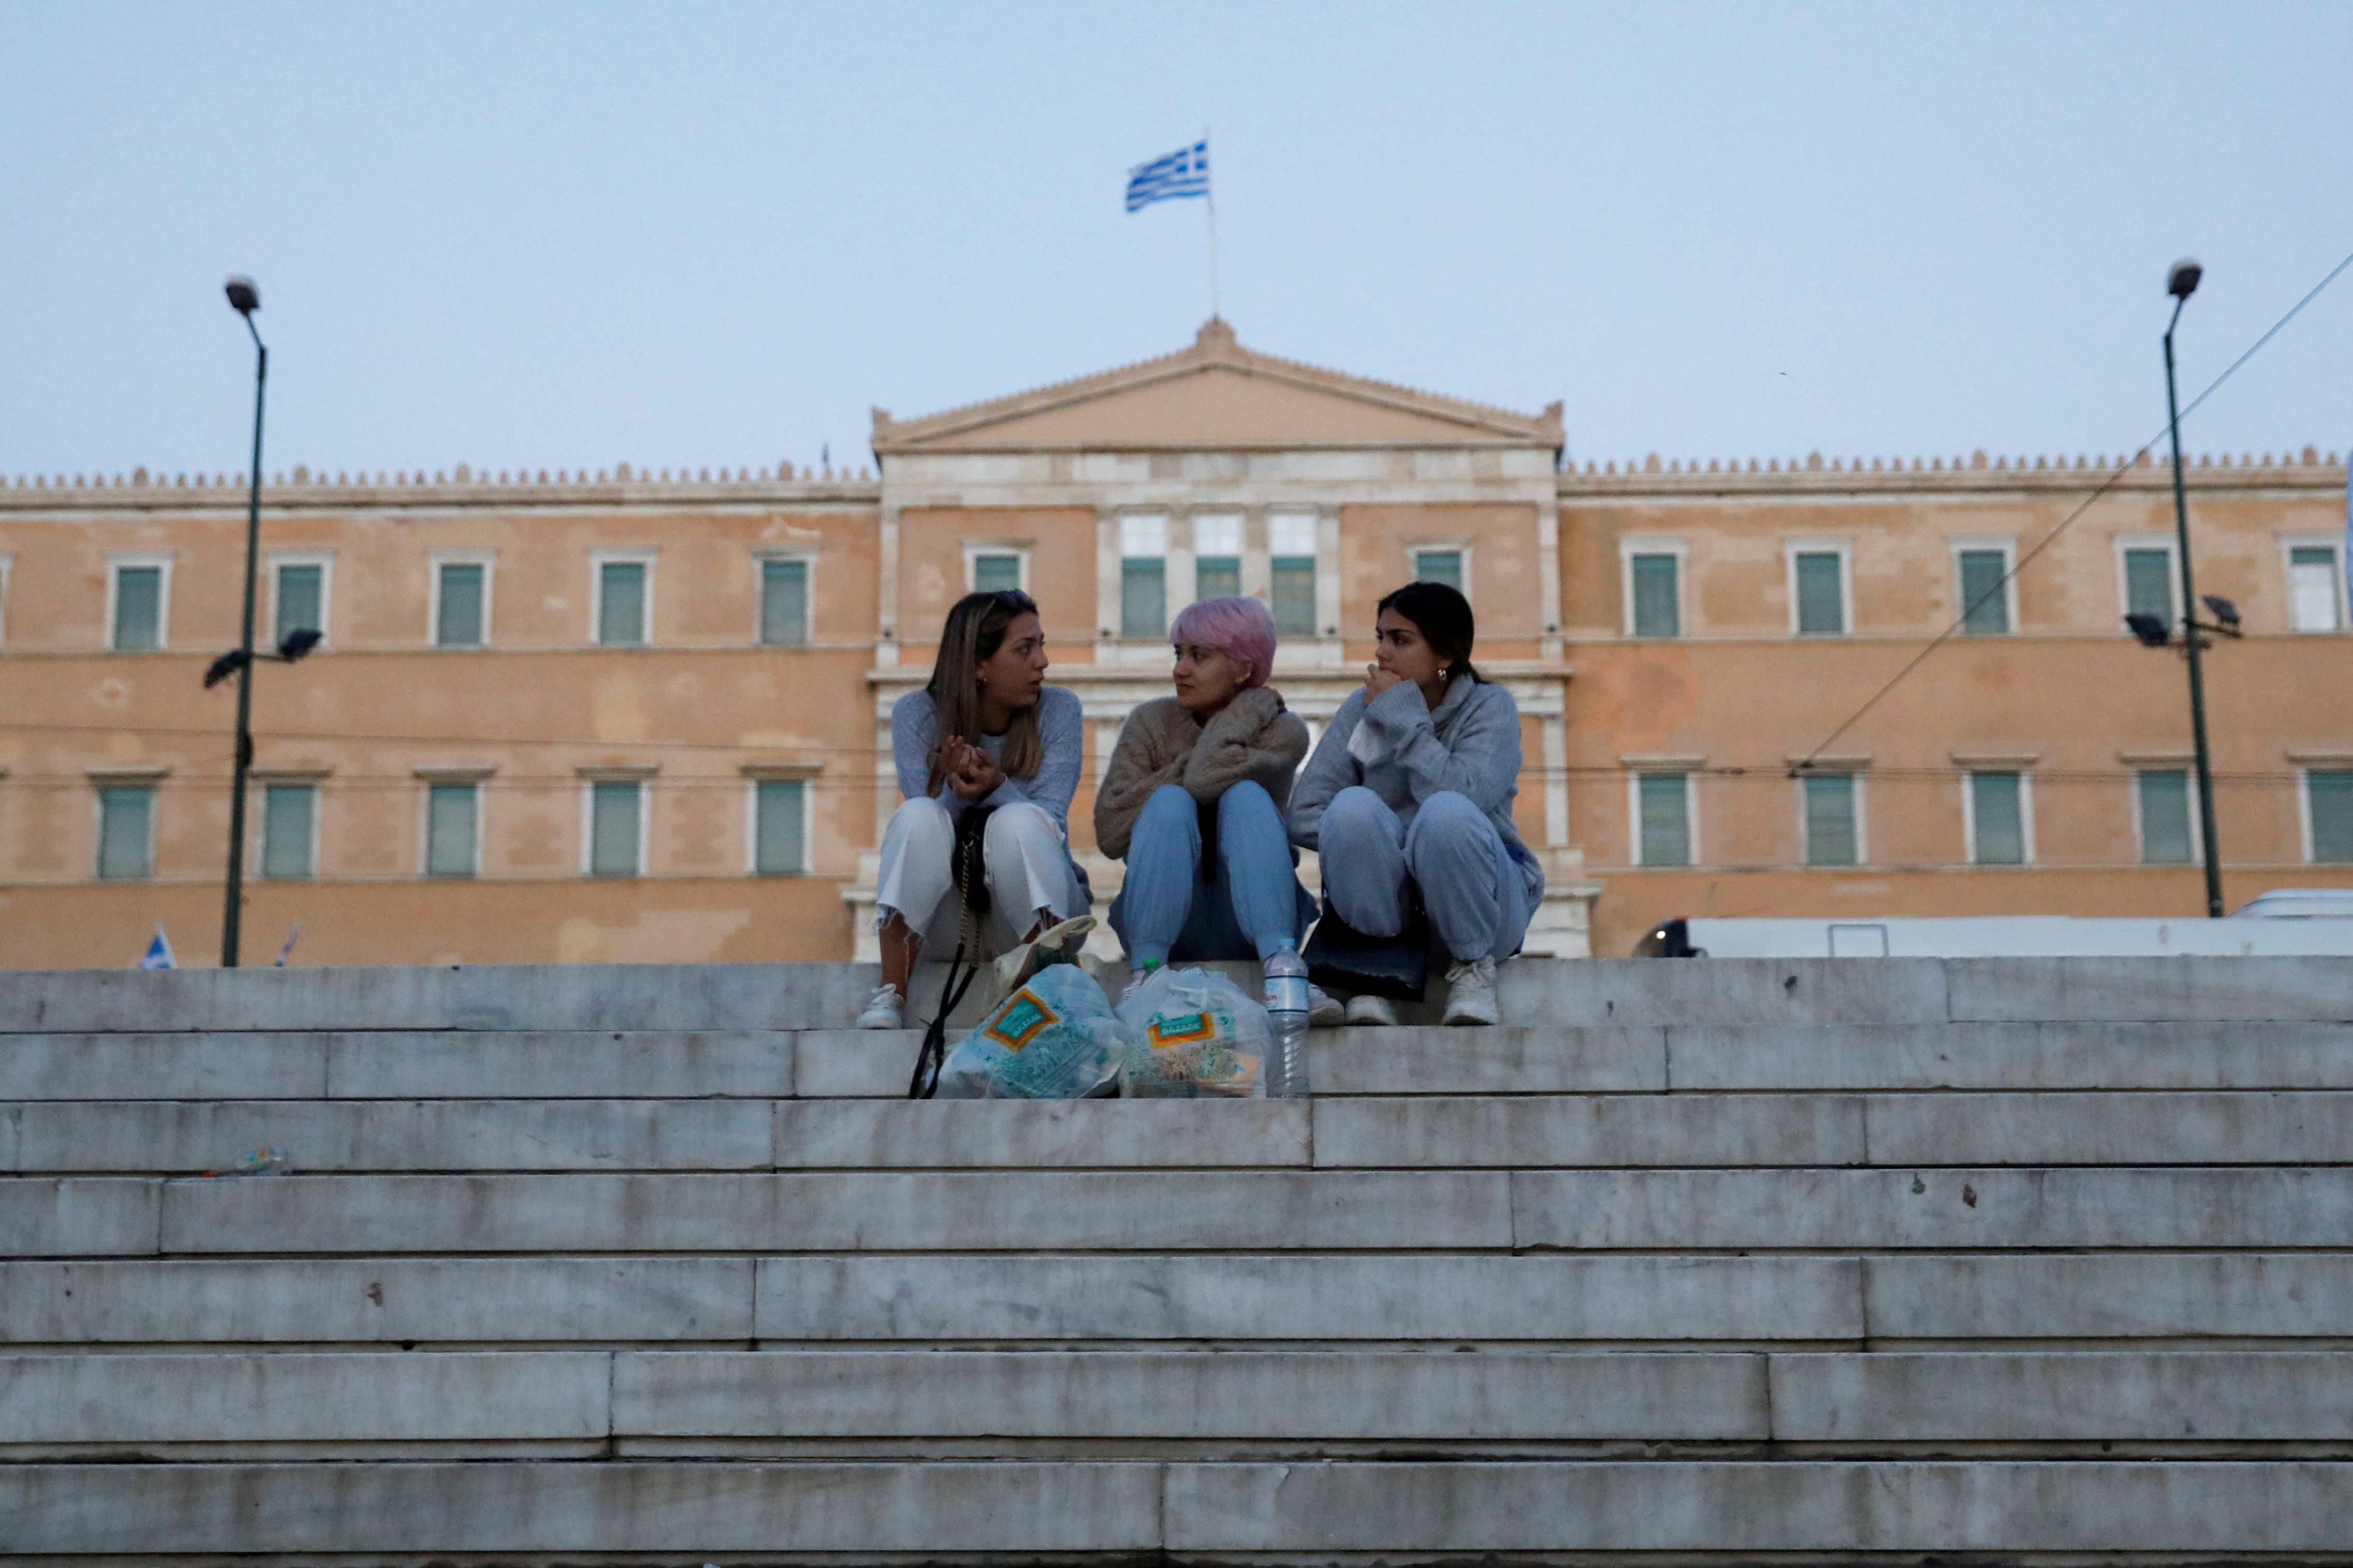 People sit at Syntagma square where parliament building is seen in the background, in Athens